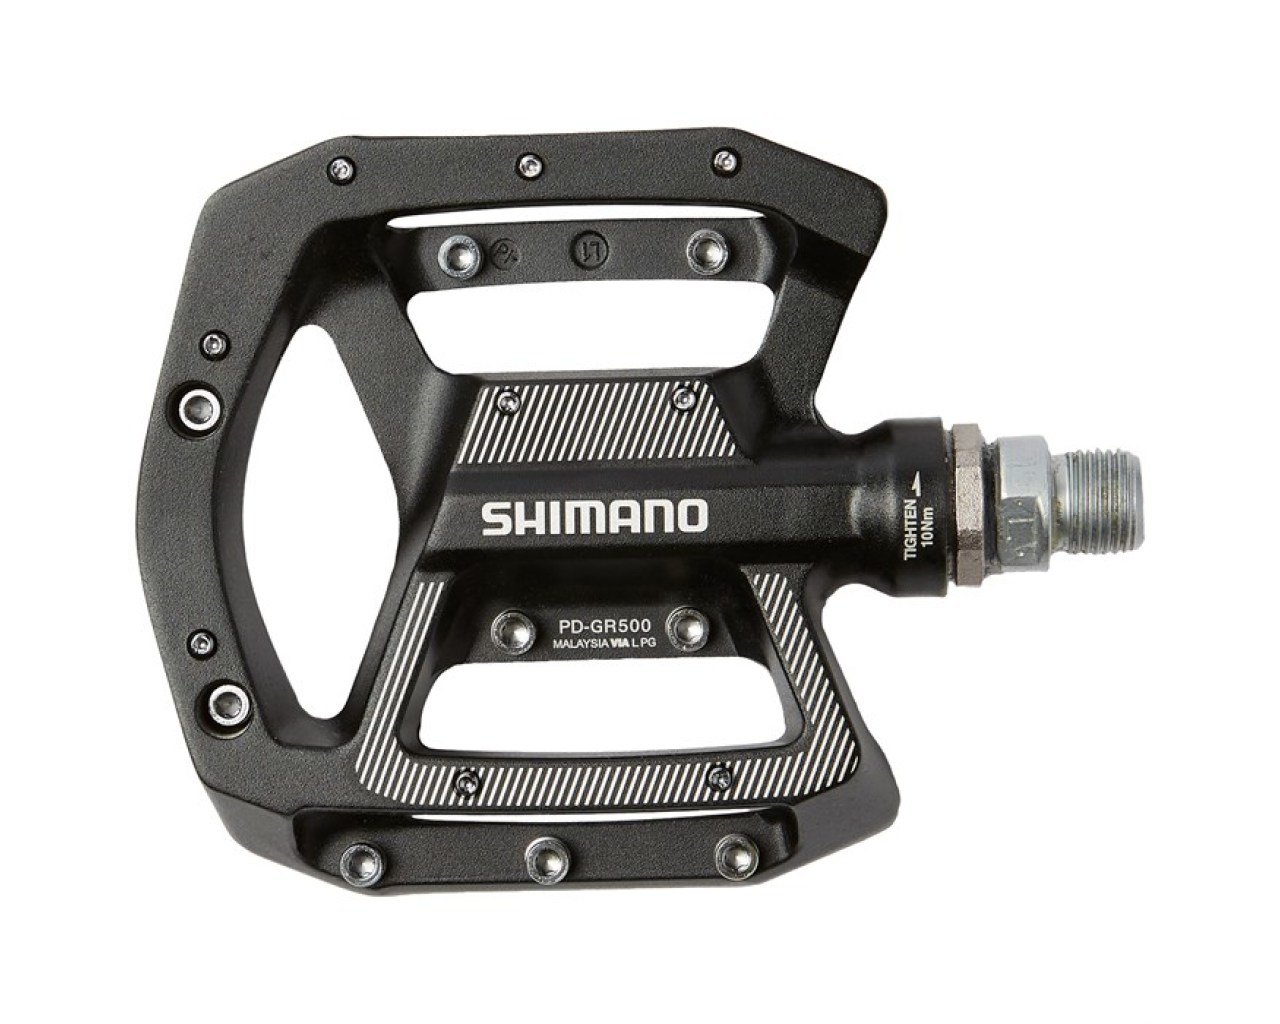 Shimano GR500 Flat Pedals | Merlin Cycles